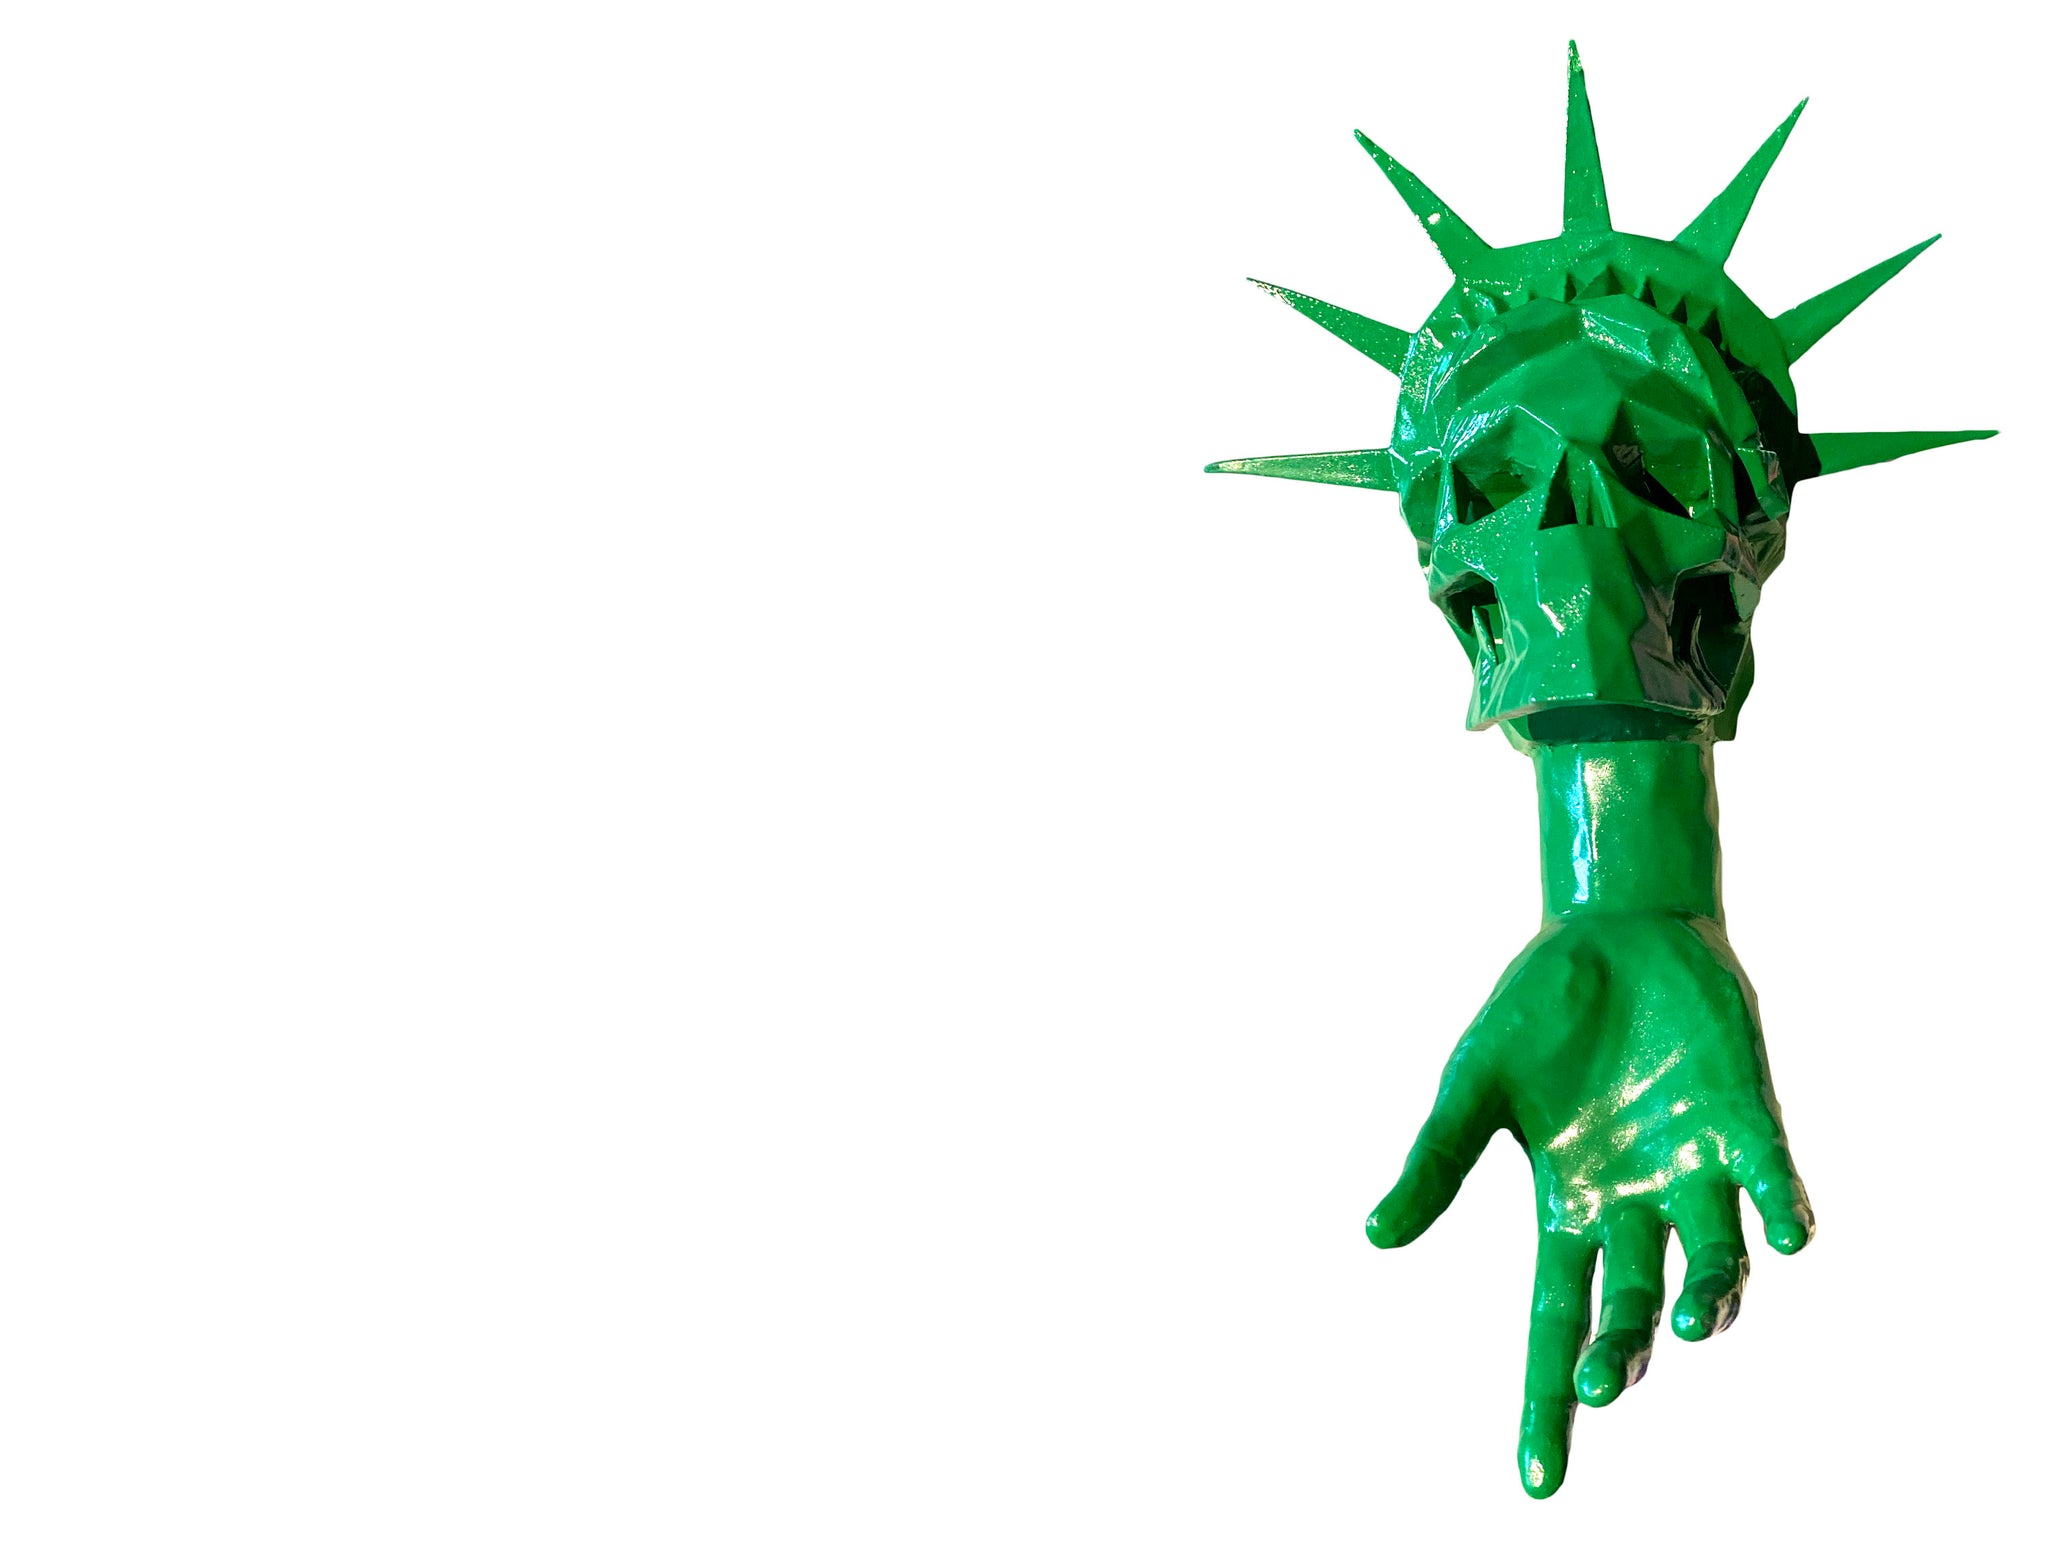 AEQEA My country tis a dream, hand jobs of liberty, outsourcing VIP... OOAK statue mashup